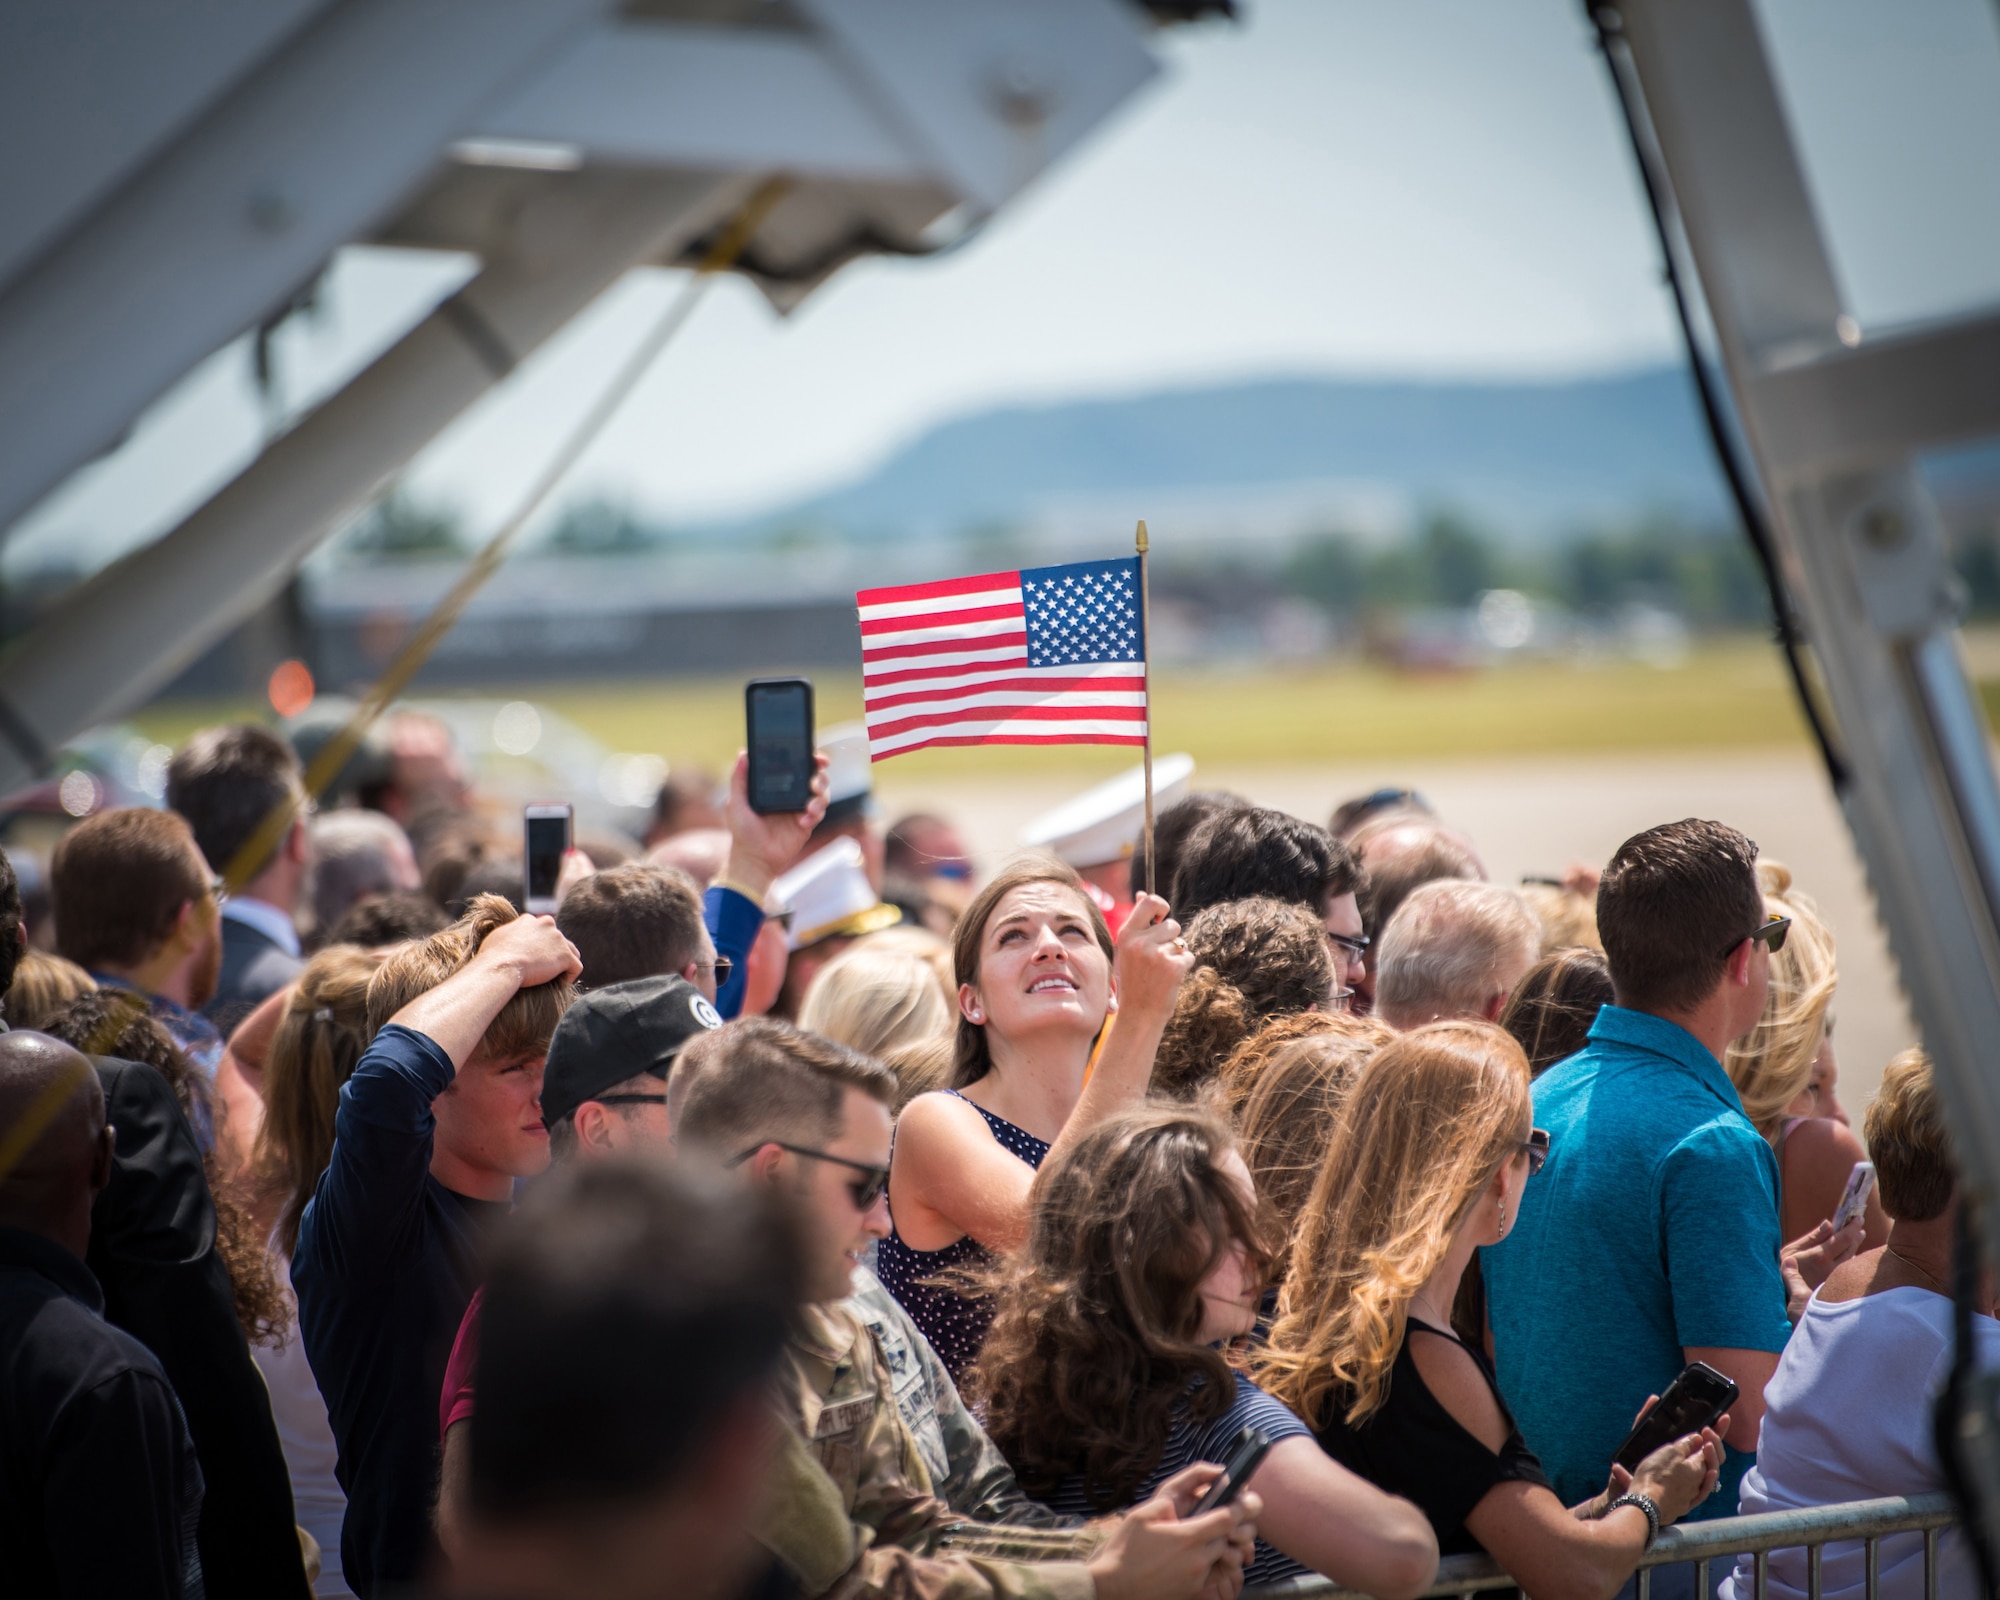 A supporter of President Donald Trump waits for his arrival at the Kentucky Air National Guard Base in Louisville, Ky., Aug. 21, 2019. Trump was in town to speak at an AMVETS convention and attend a fundraiser for Kentucky Gov. Matt Bevin’s re-election campaign. (U.S. Air National Guard photo by Airman 1st Class Chloe Ochs)